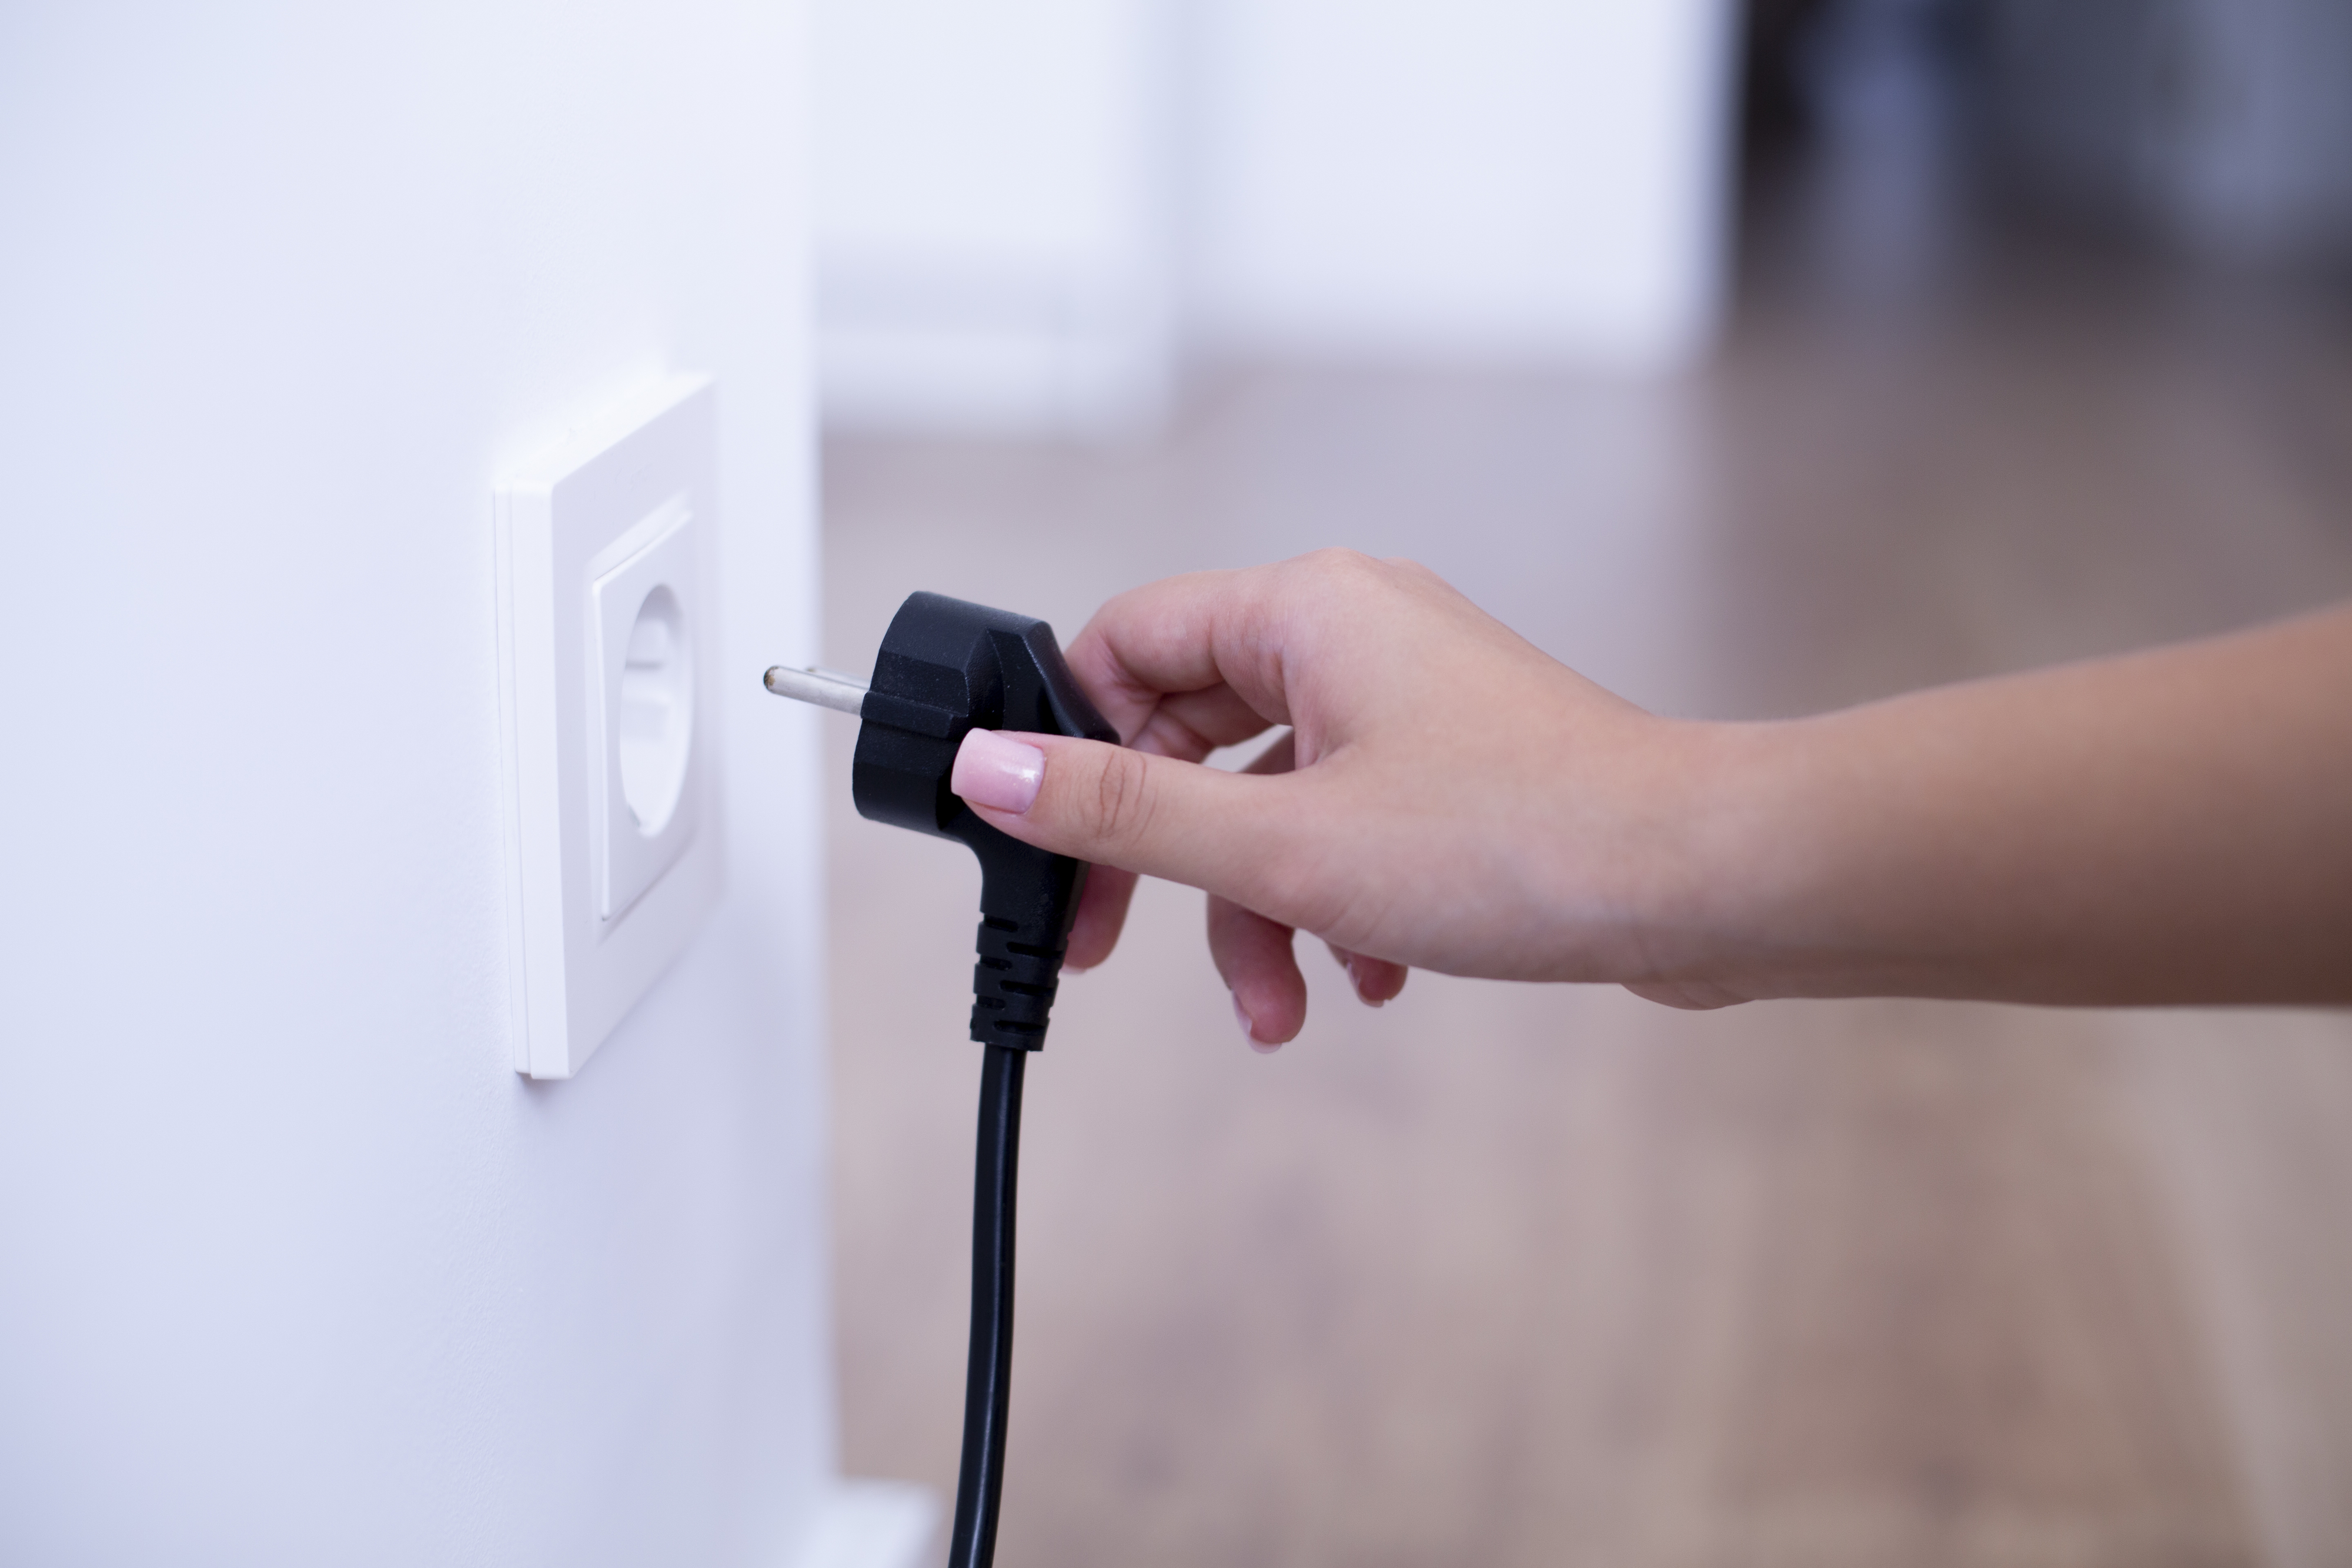 Woman unplugging an appliance from a wall outlet